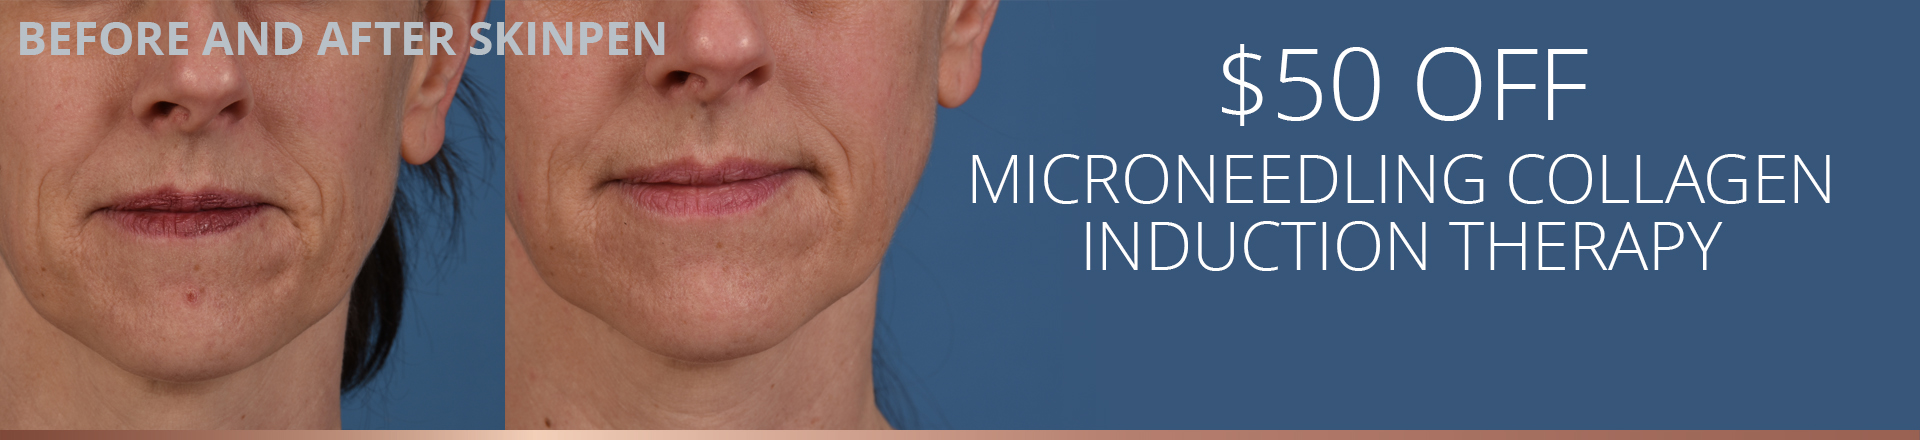 Microneedling Collagen Induction Therapy Special Offer